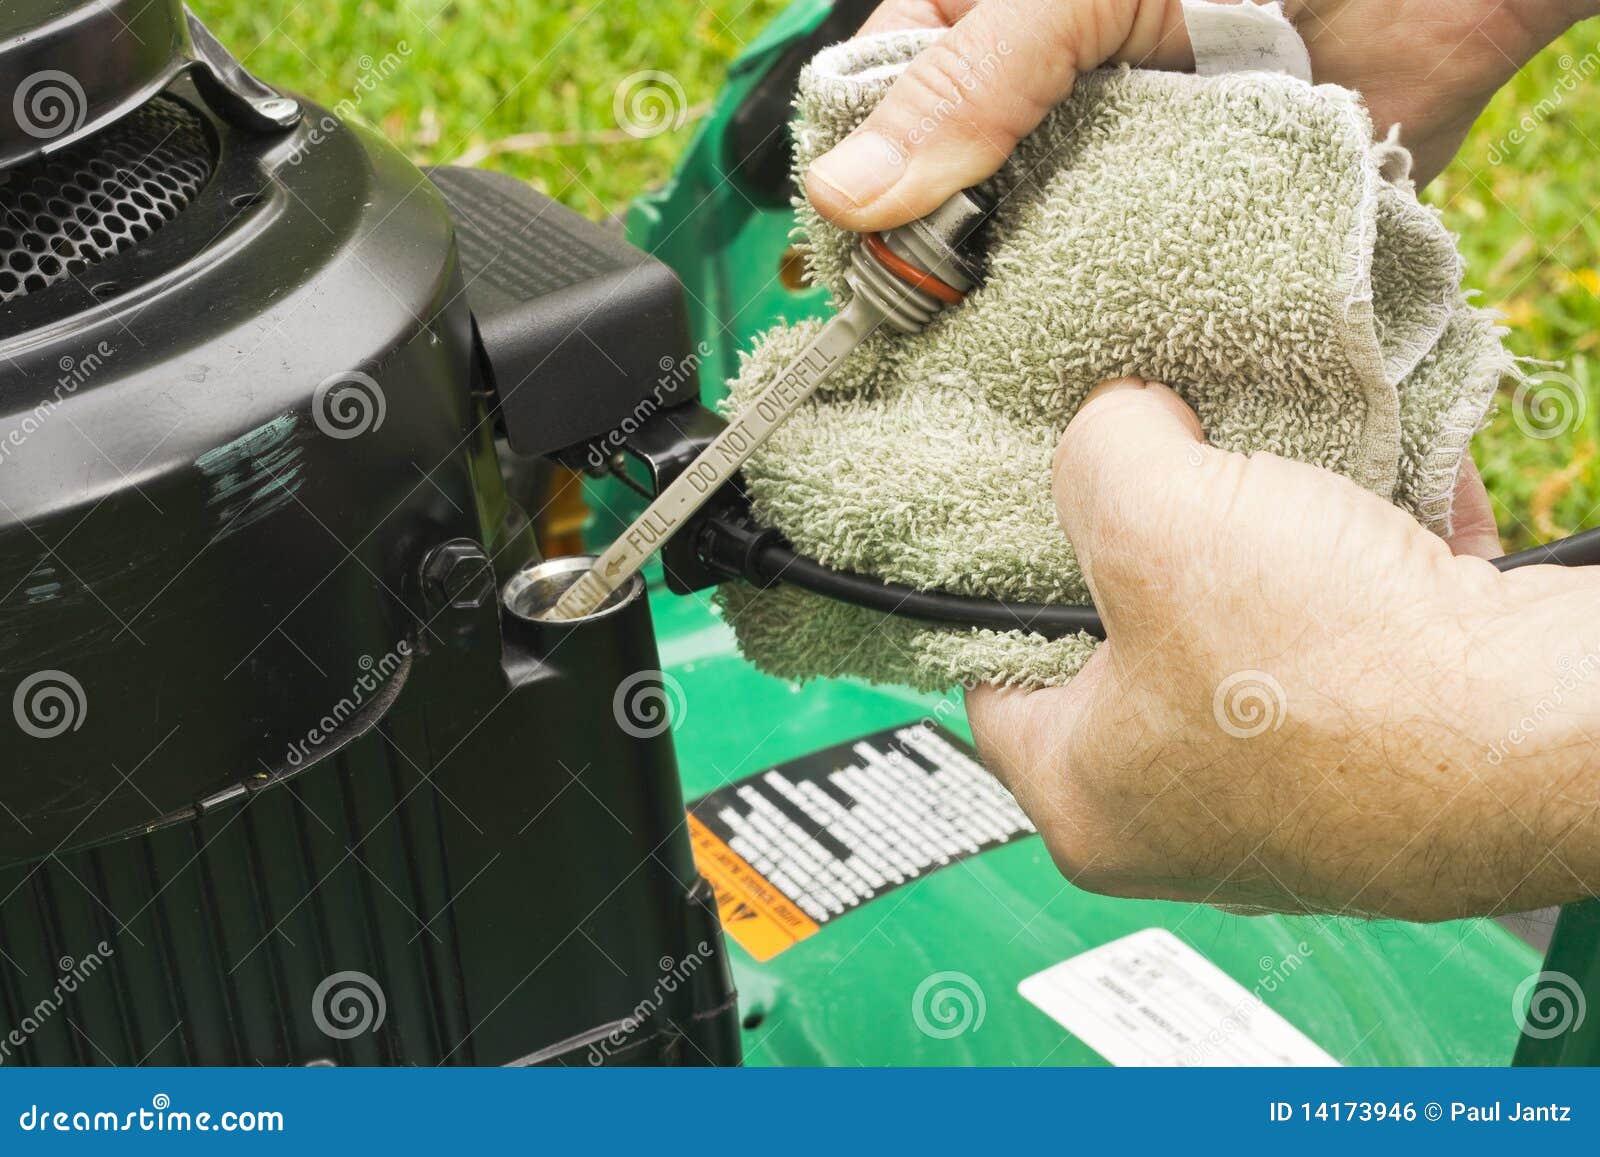 Checking Oil On A Lawn Mower Royalty Free Stock Image - Image: 14173946